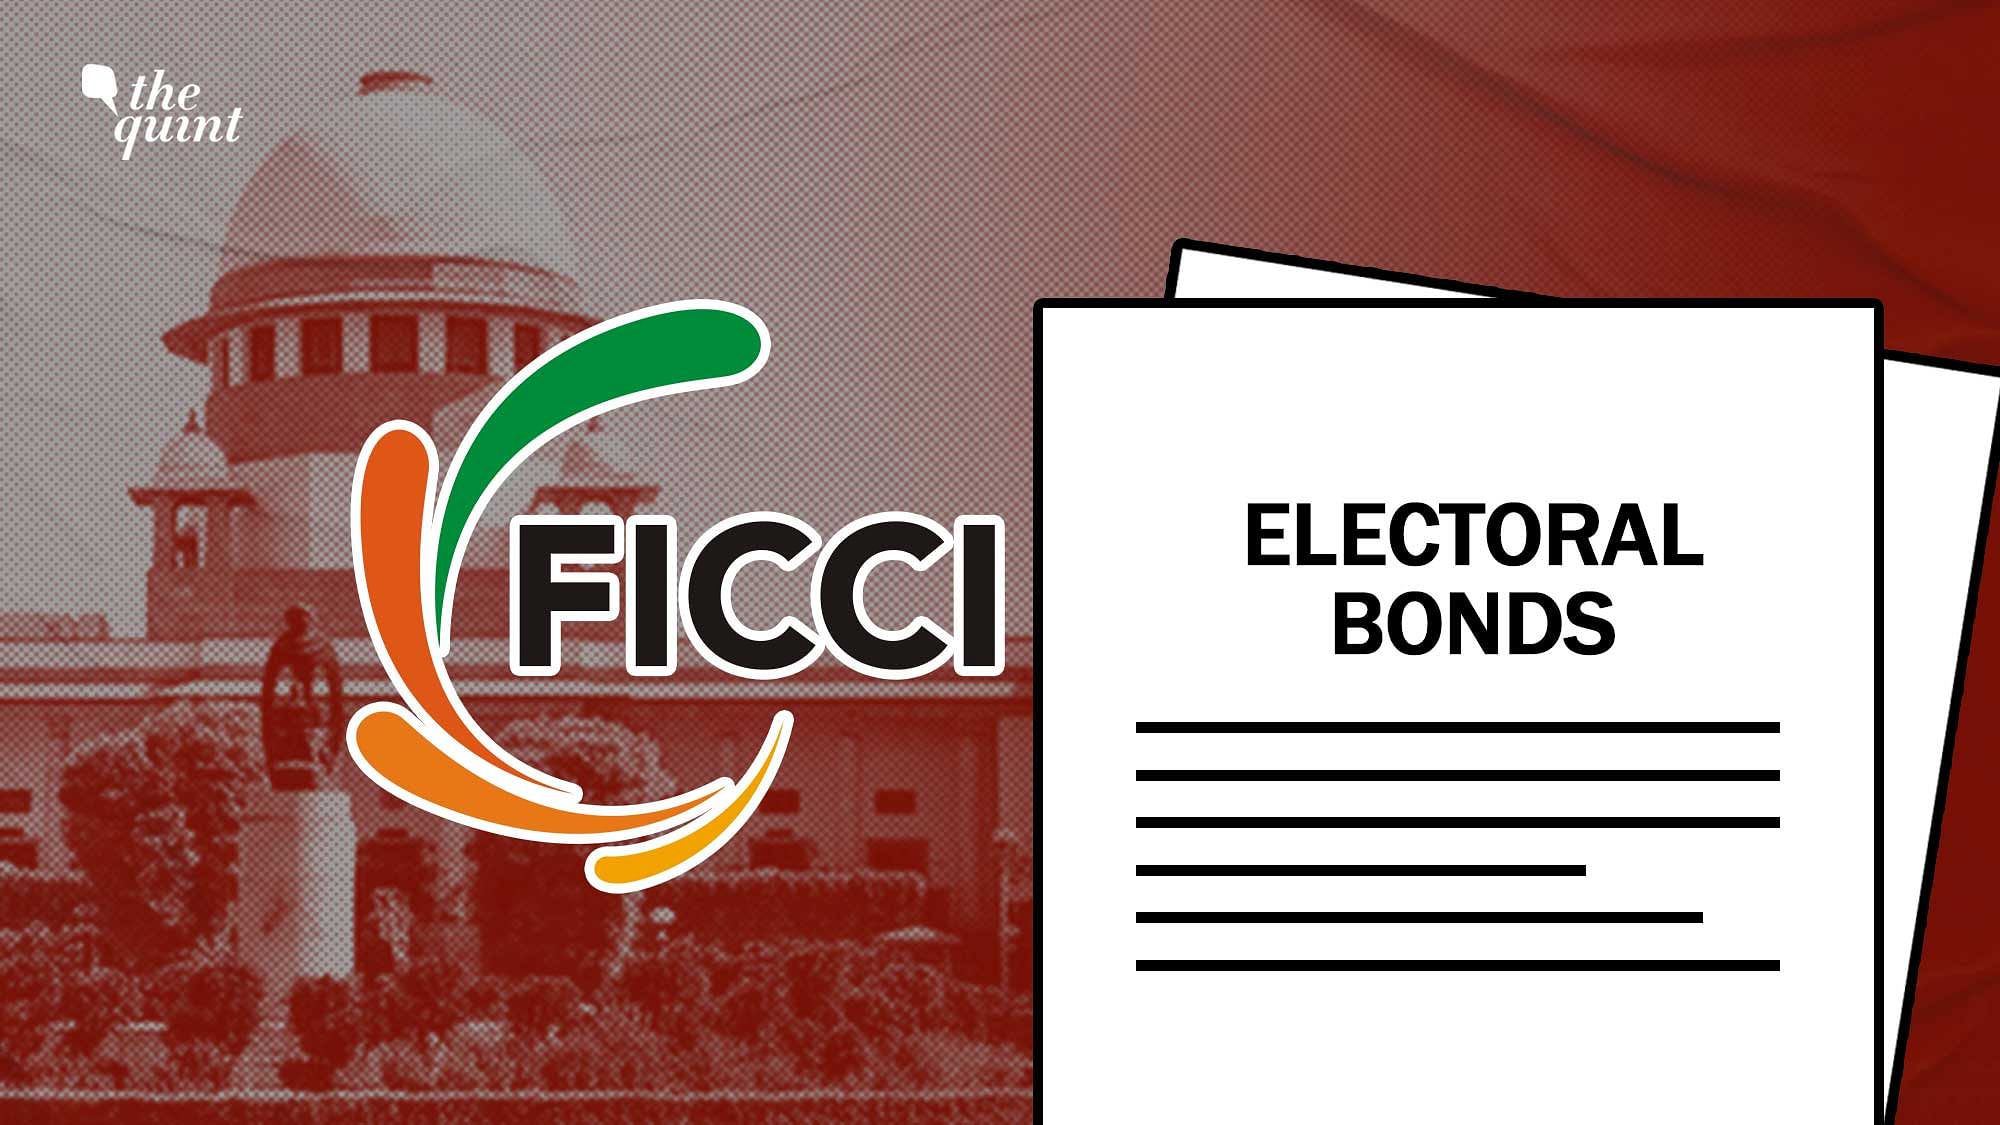 <div class="paragraphs"><p>The development occurs in light of the SC asking the SBI to disclose all 'conceivable' details available with it regarding electoral bonds, including the alphanumeric number corresponding to each bond.</p></div>